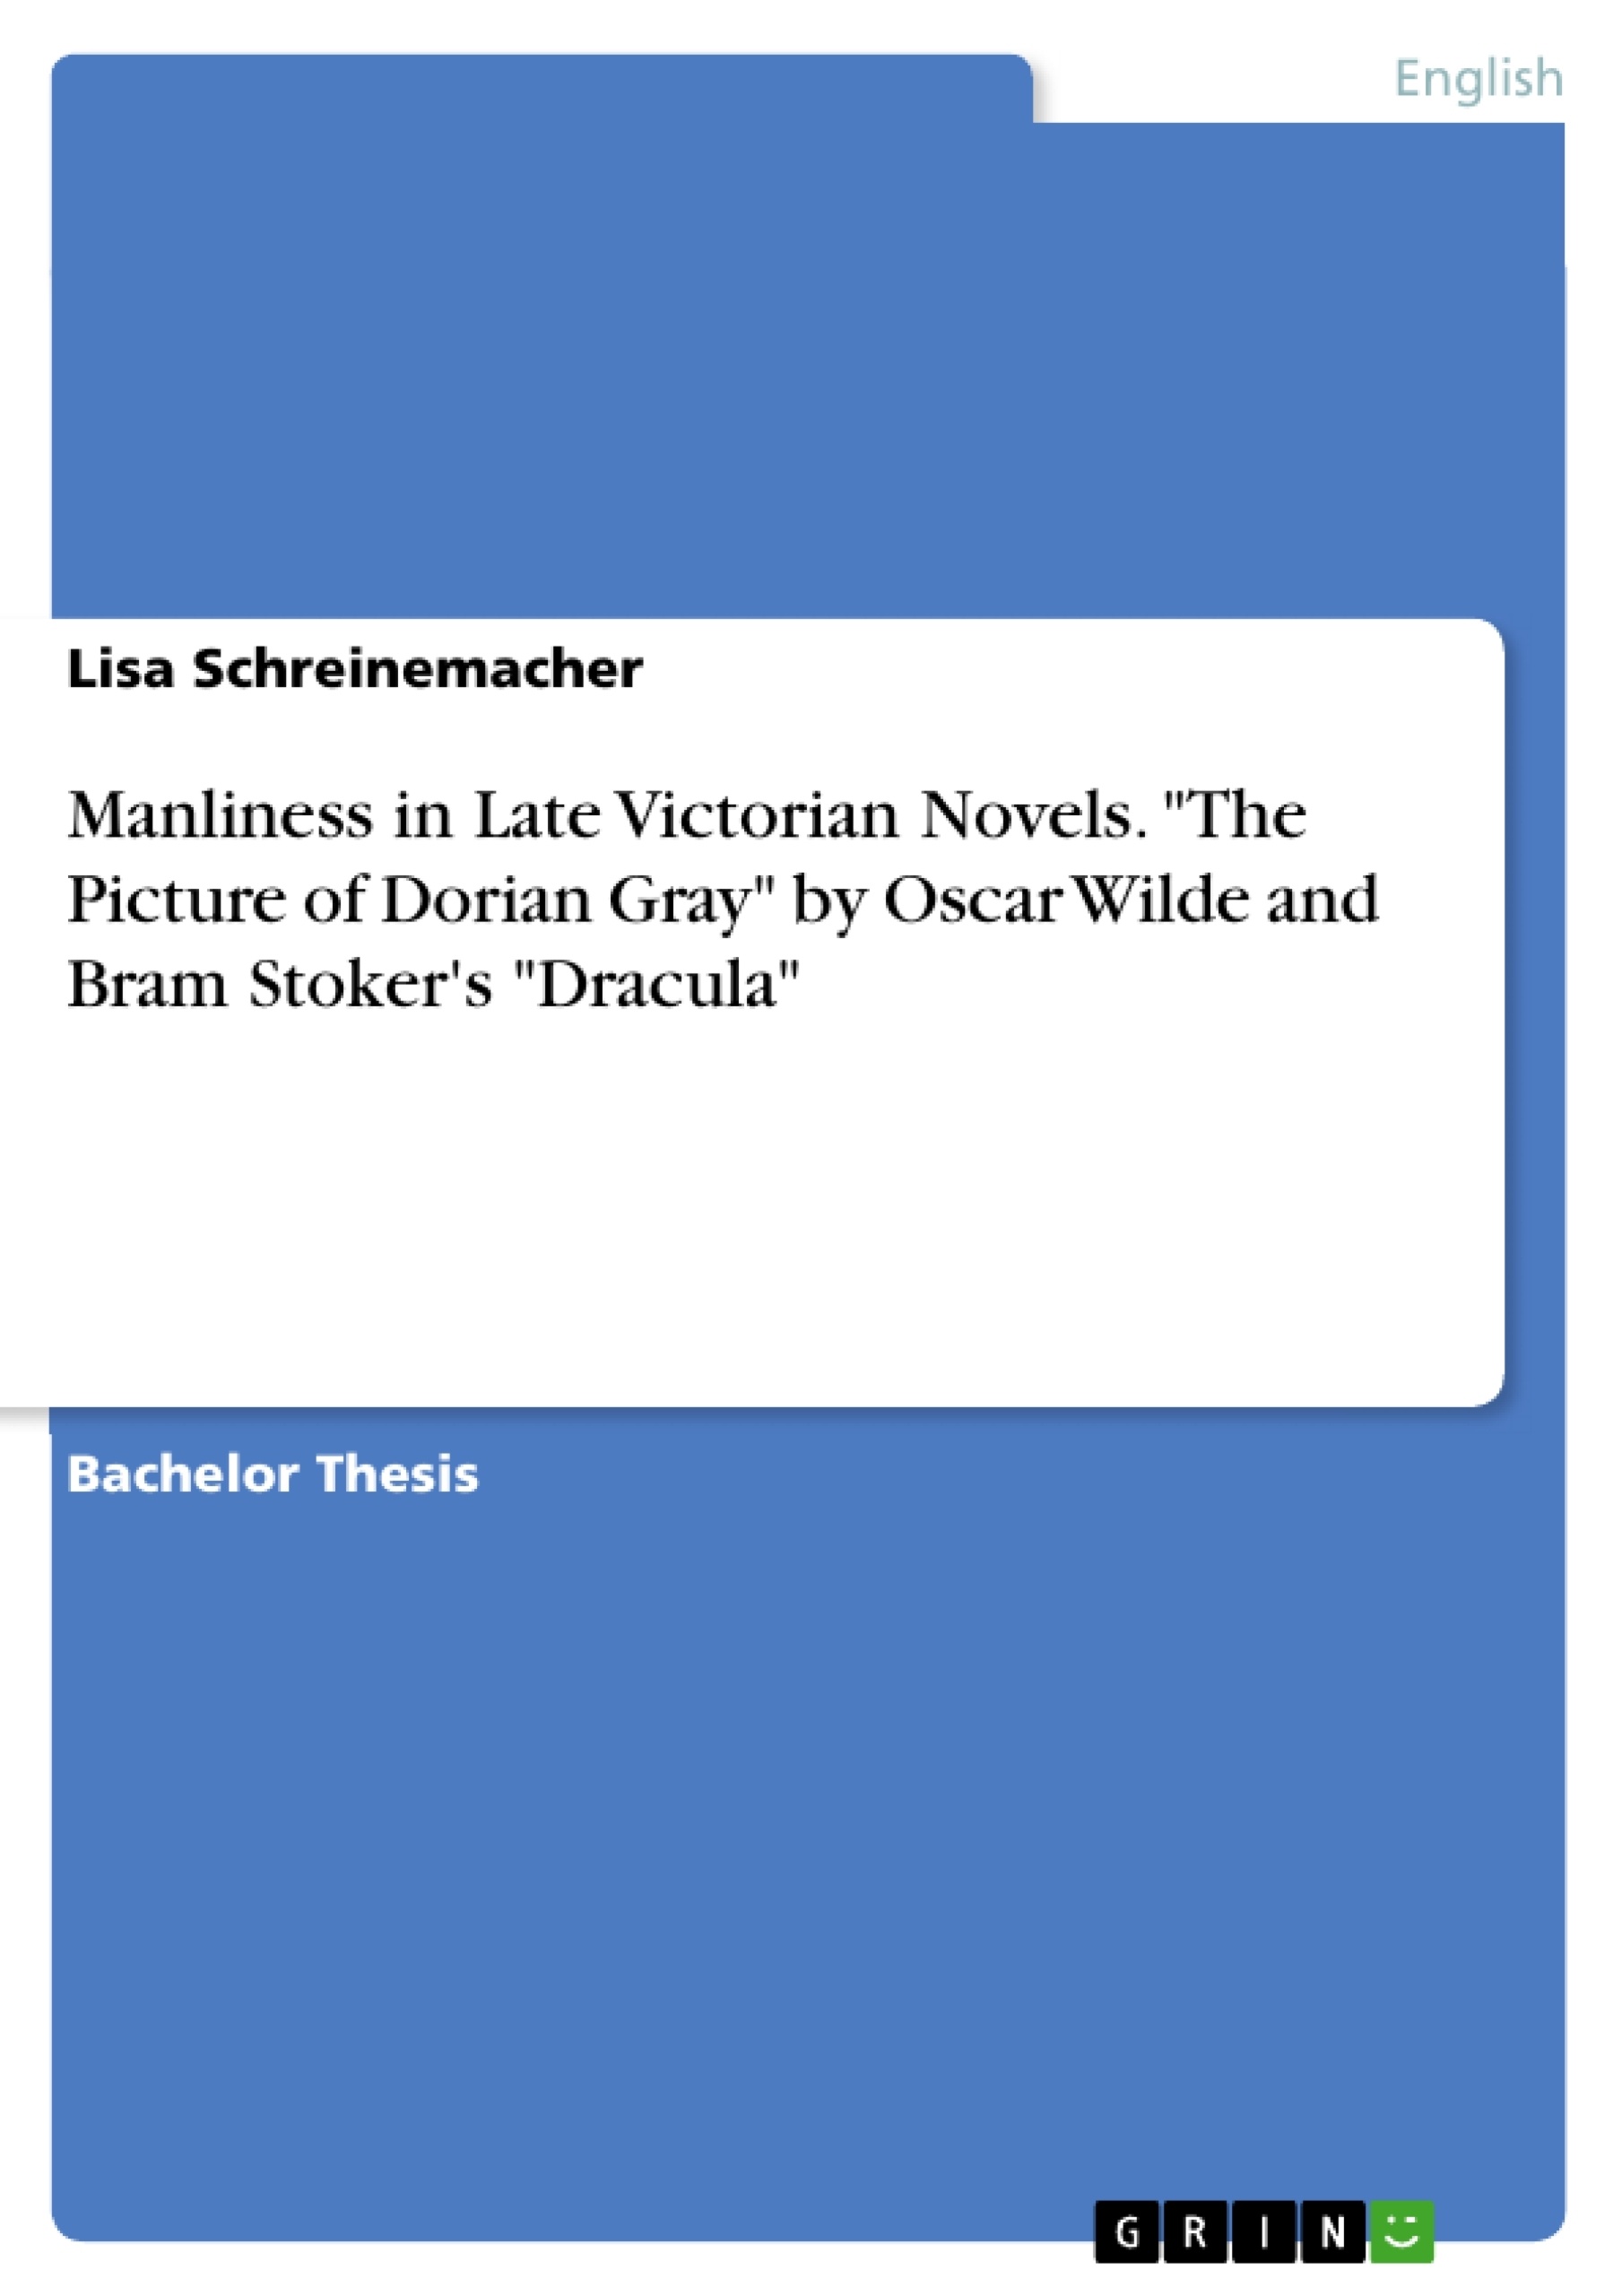 Title: Manliness in Late Victorian Novels. "The Picture of Dorian Gray" by Oscar Wilde and Bram Stoker's "Dracula"